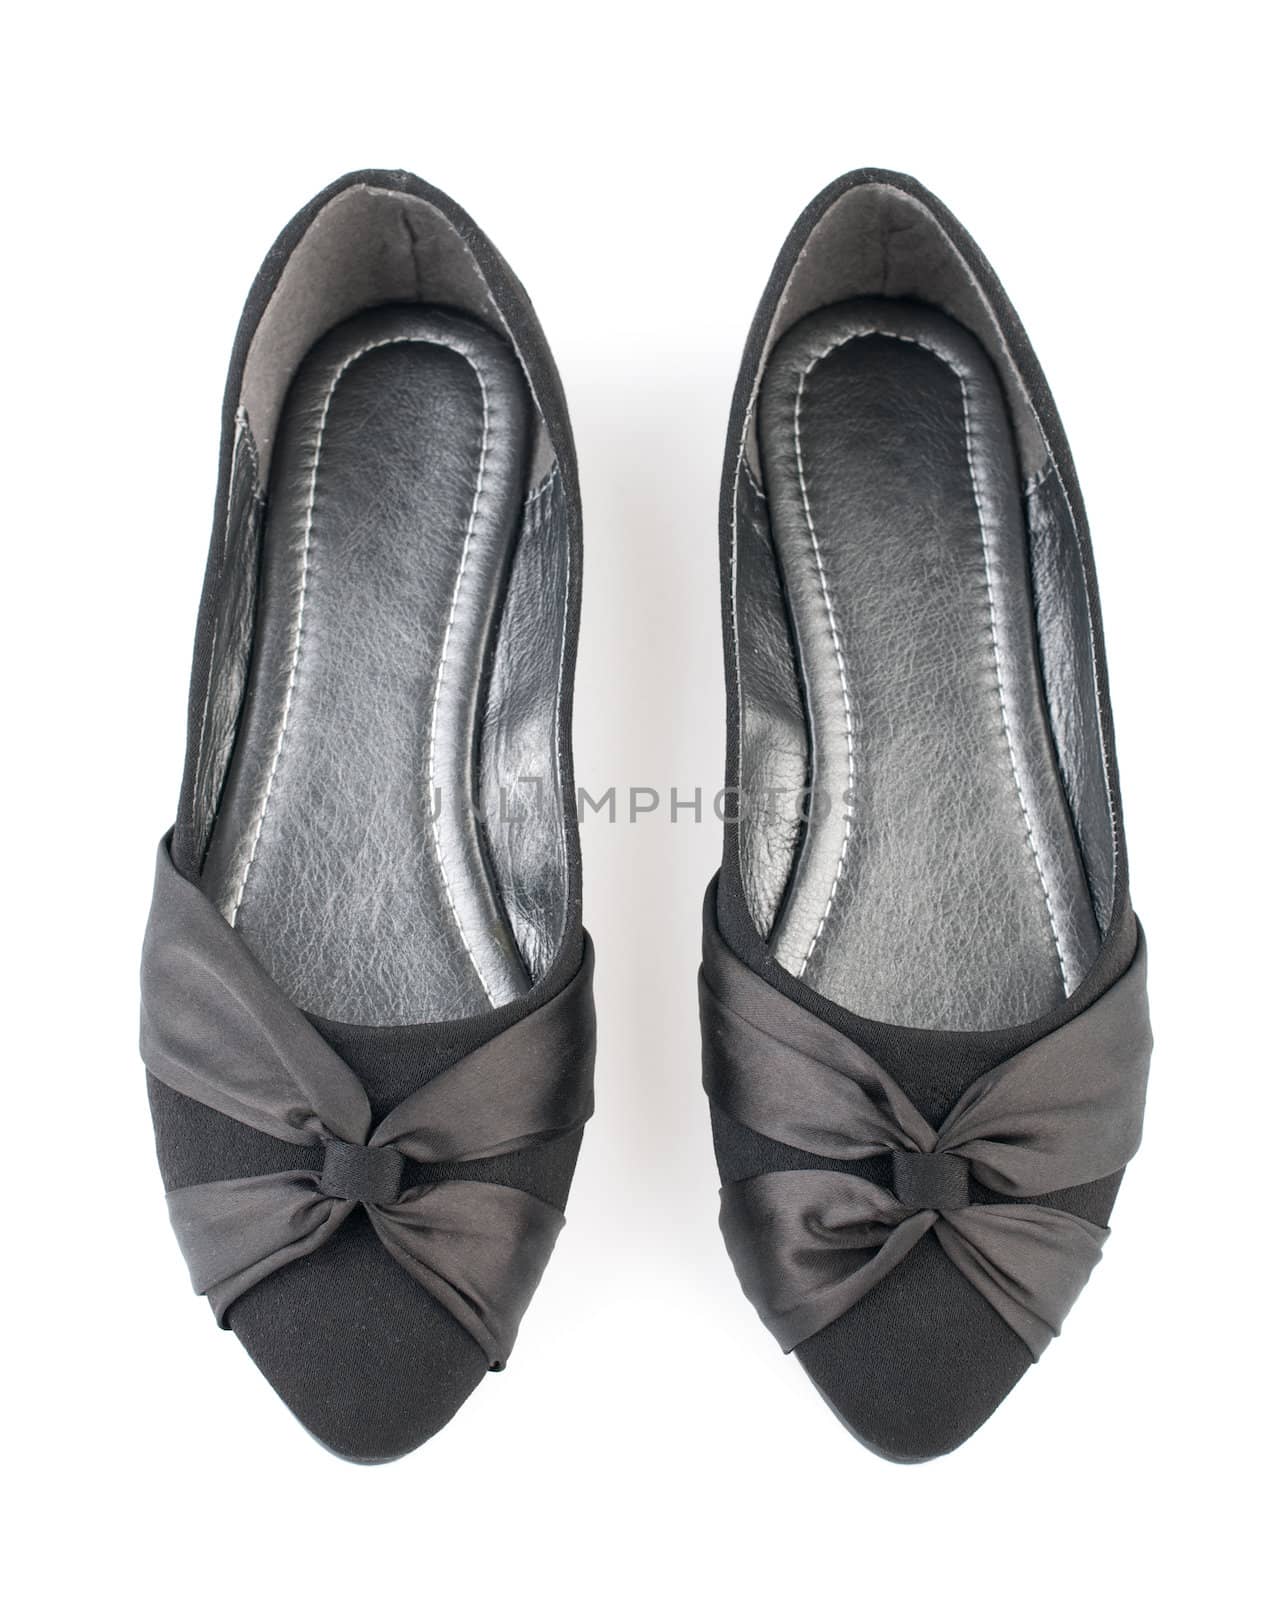 Pair of black casual woman shoes by szefei